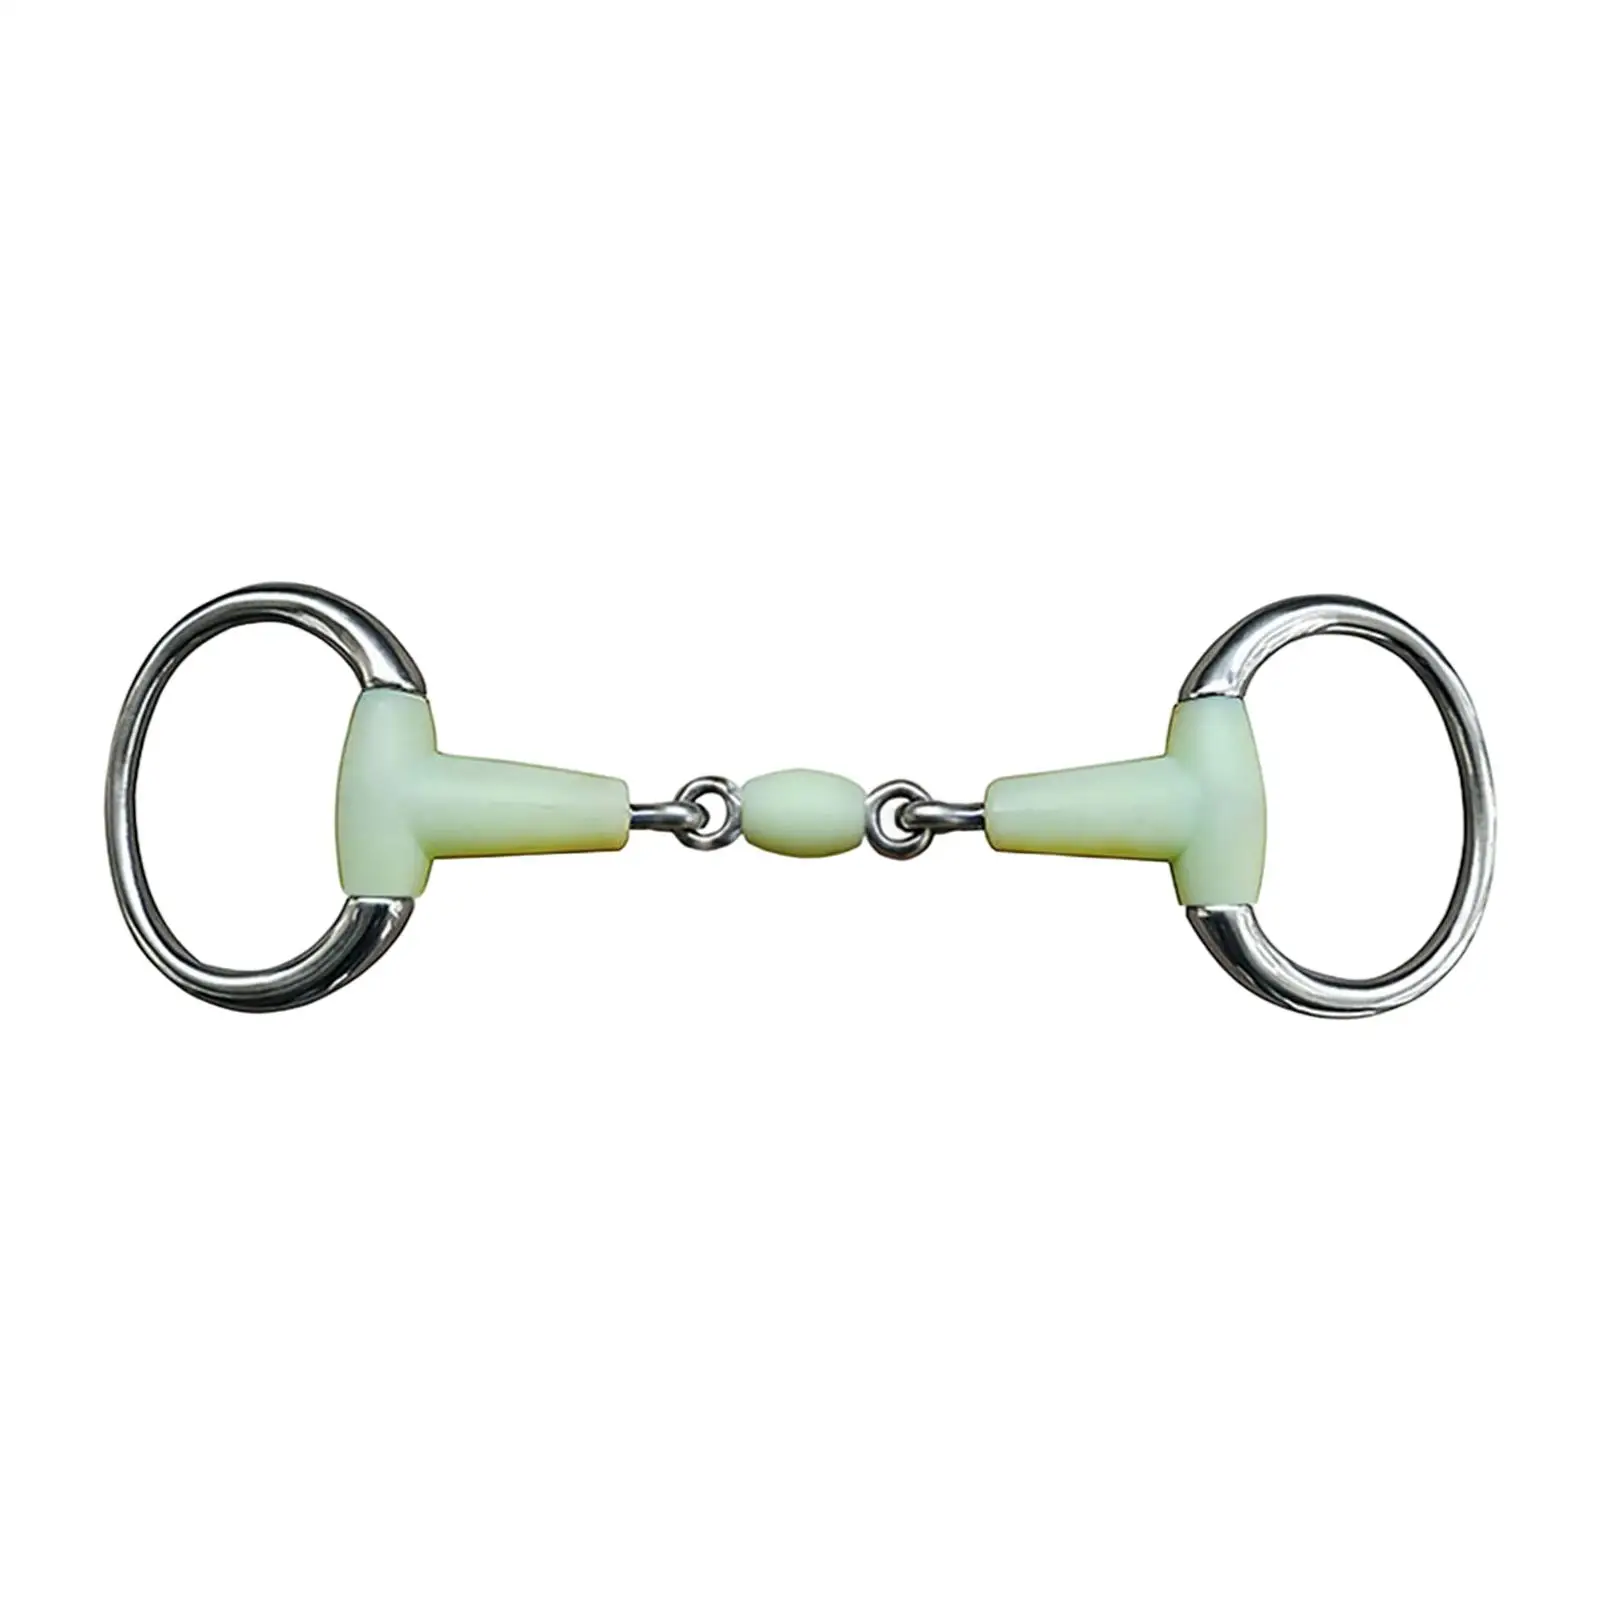 Ultralight Horse Ring Bit Horse Training Tool Heavy Duty for Draft Horses Mules Outdoor Sports Horse Riding Equipment Supplies